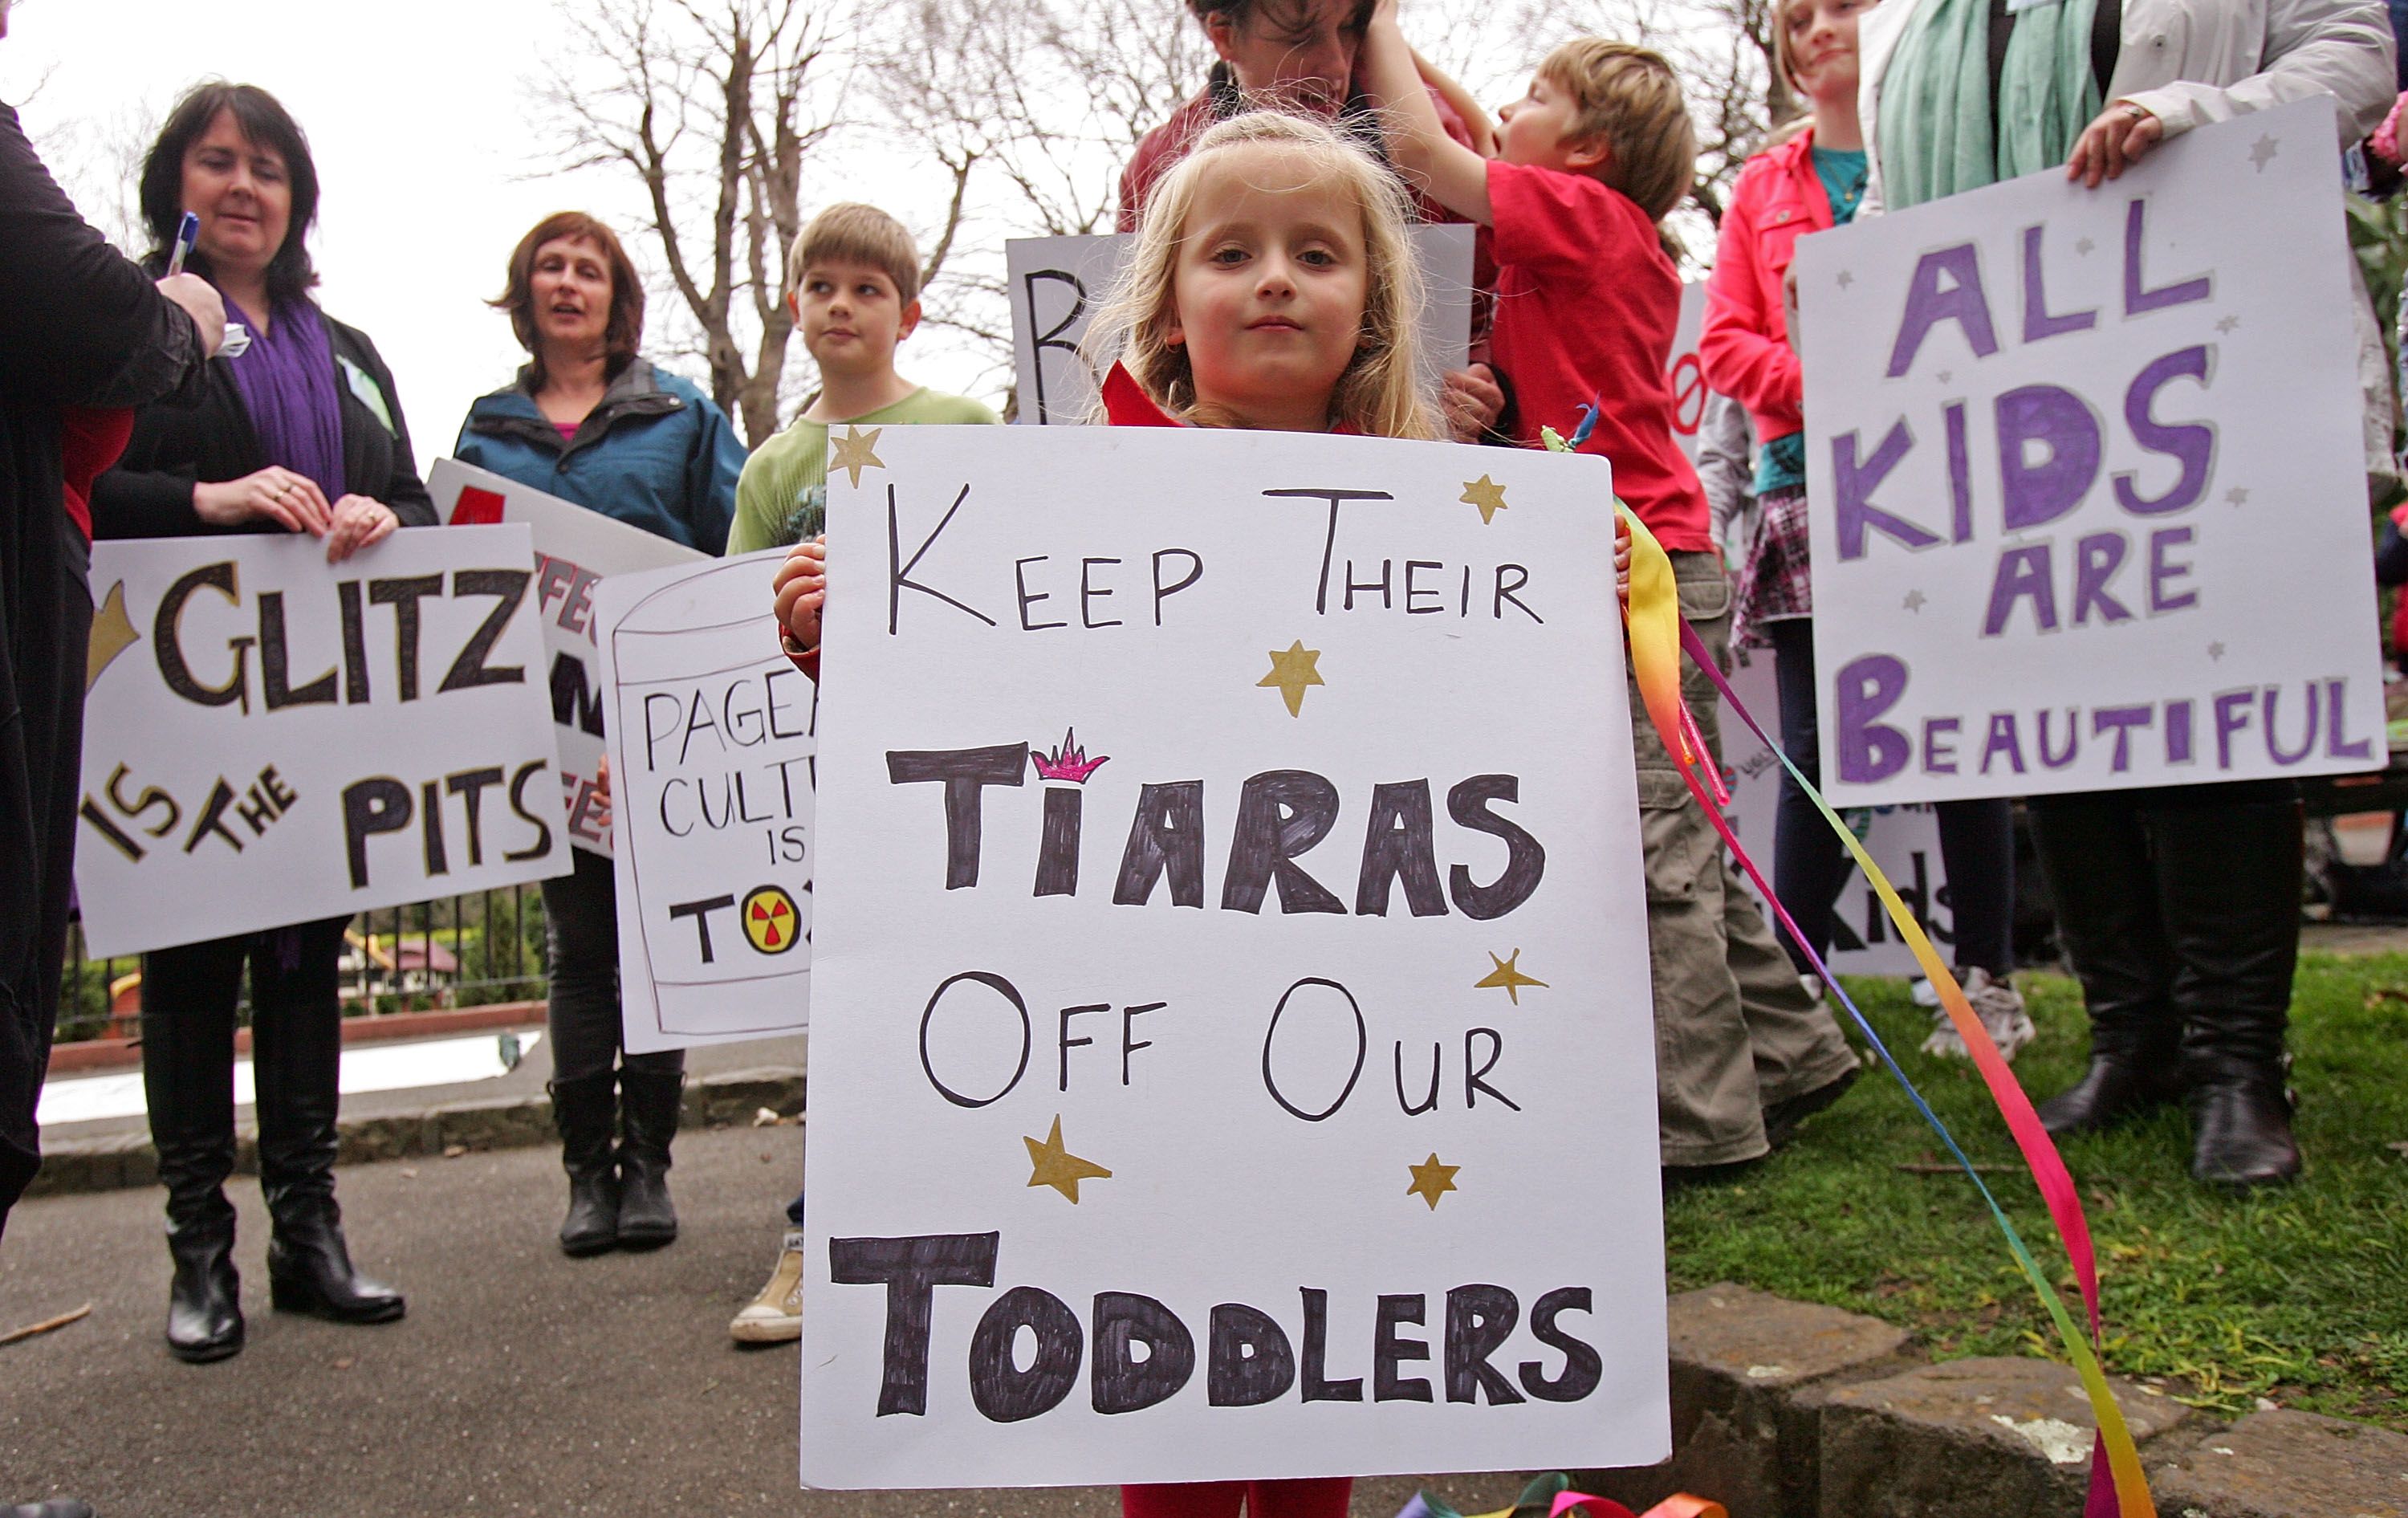 Toddlers and Tiaras' and sexualizing 3-year-olds